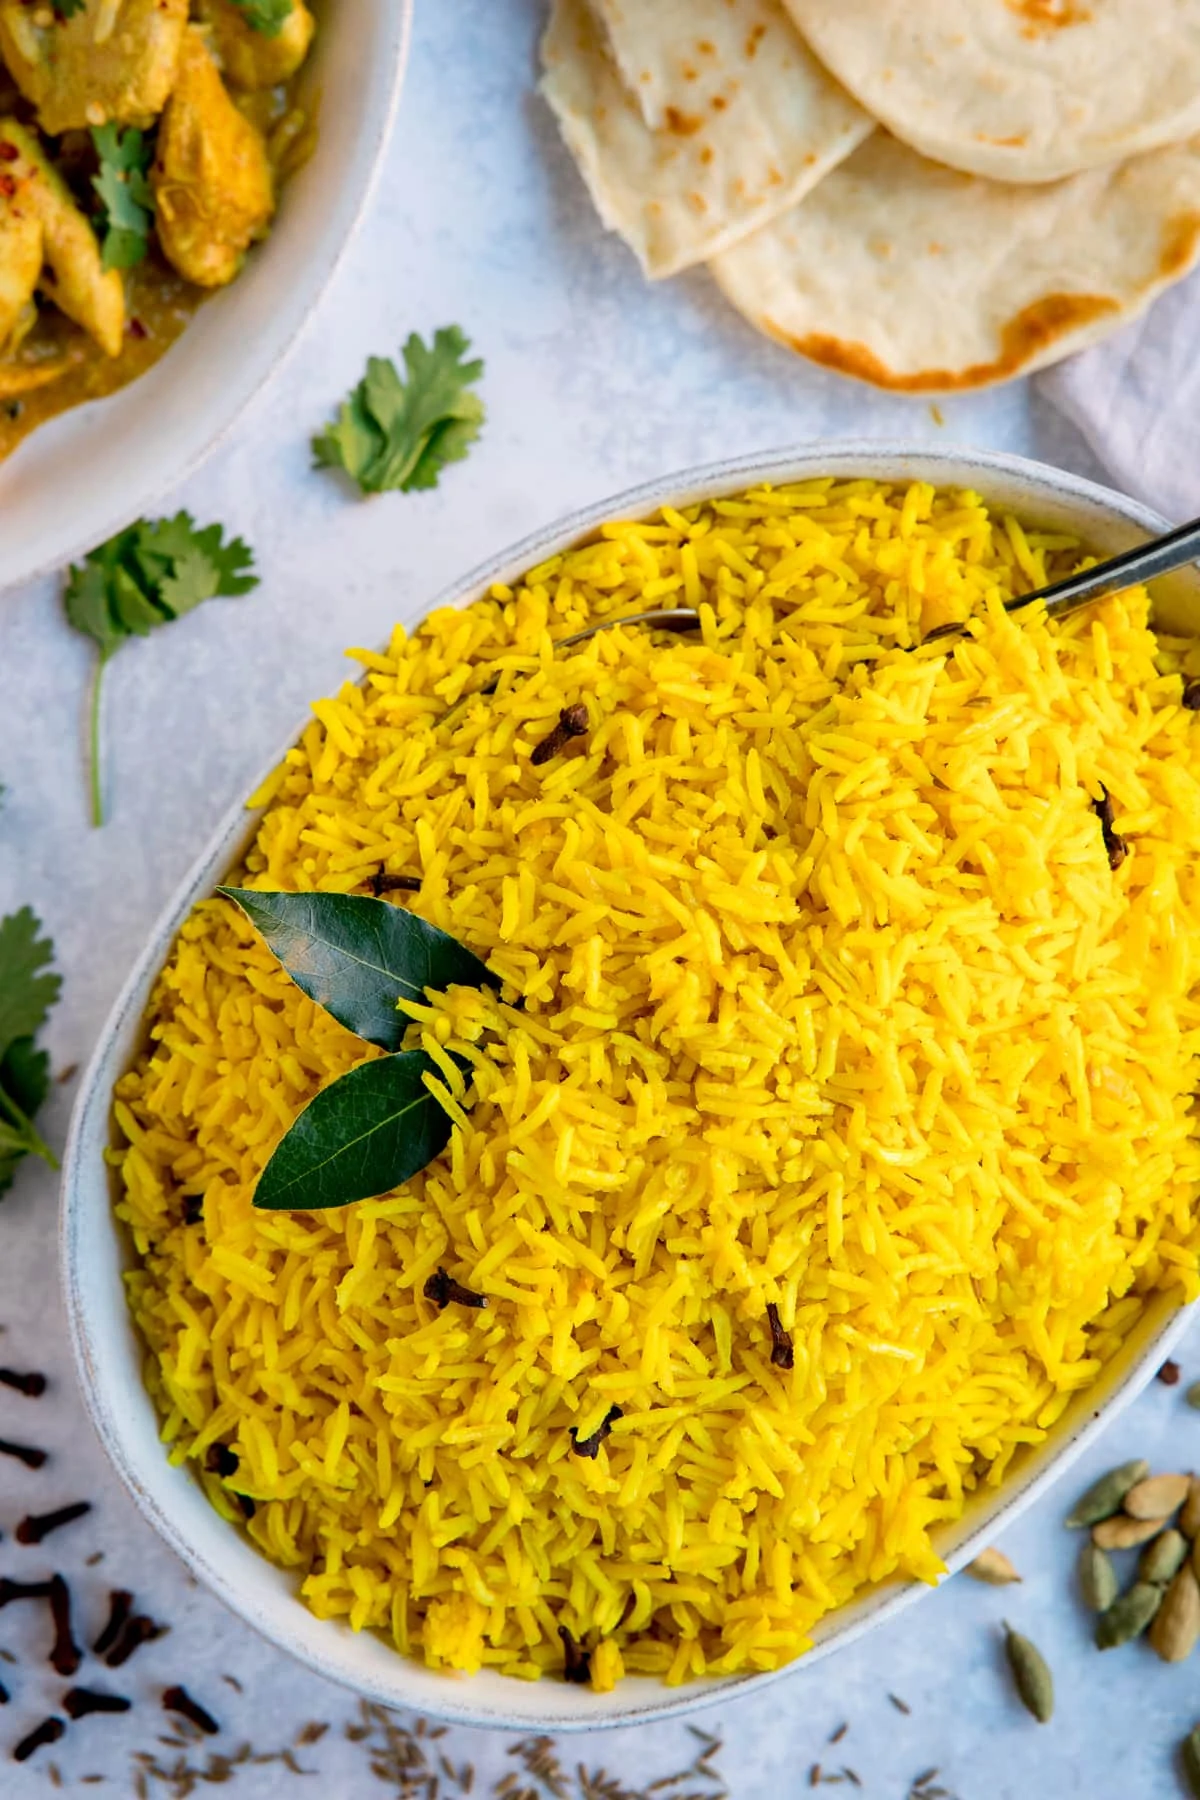 Pilau rice in a white bowl on a light background. Flatbreads and plate of curry just in frame